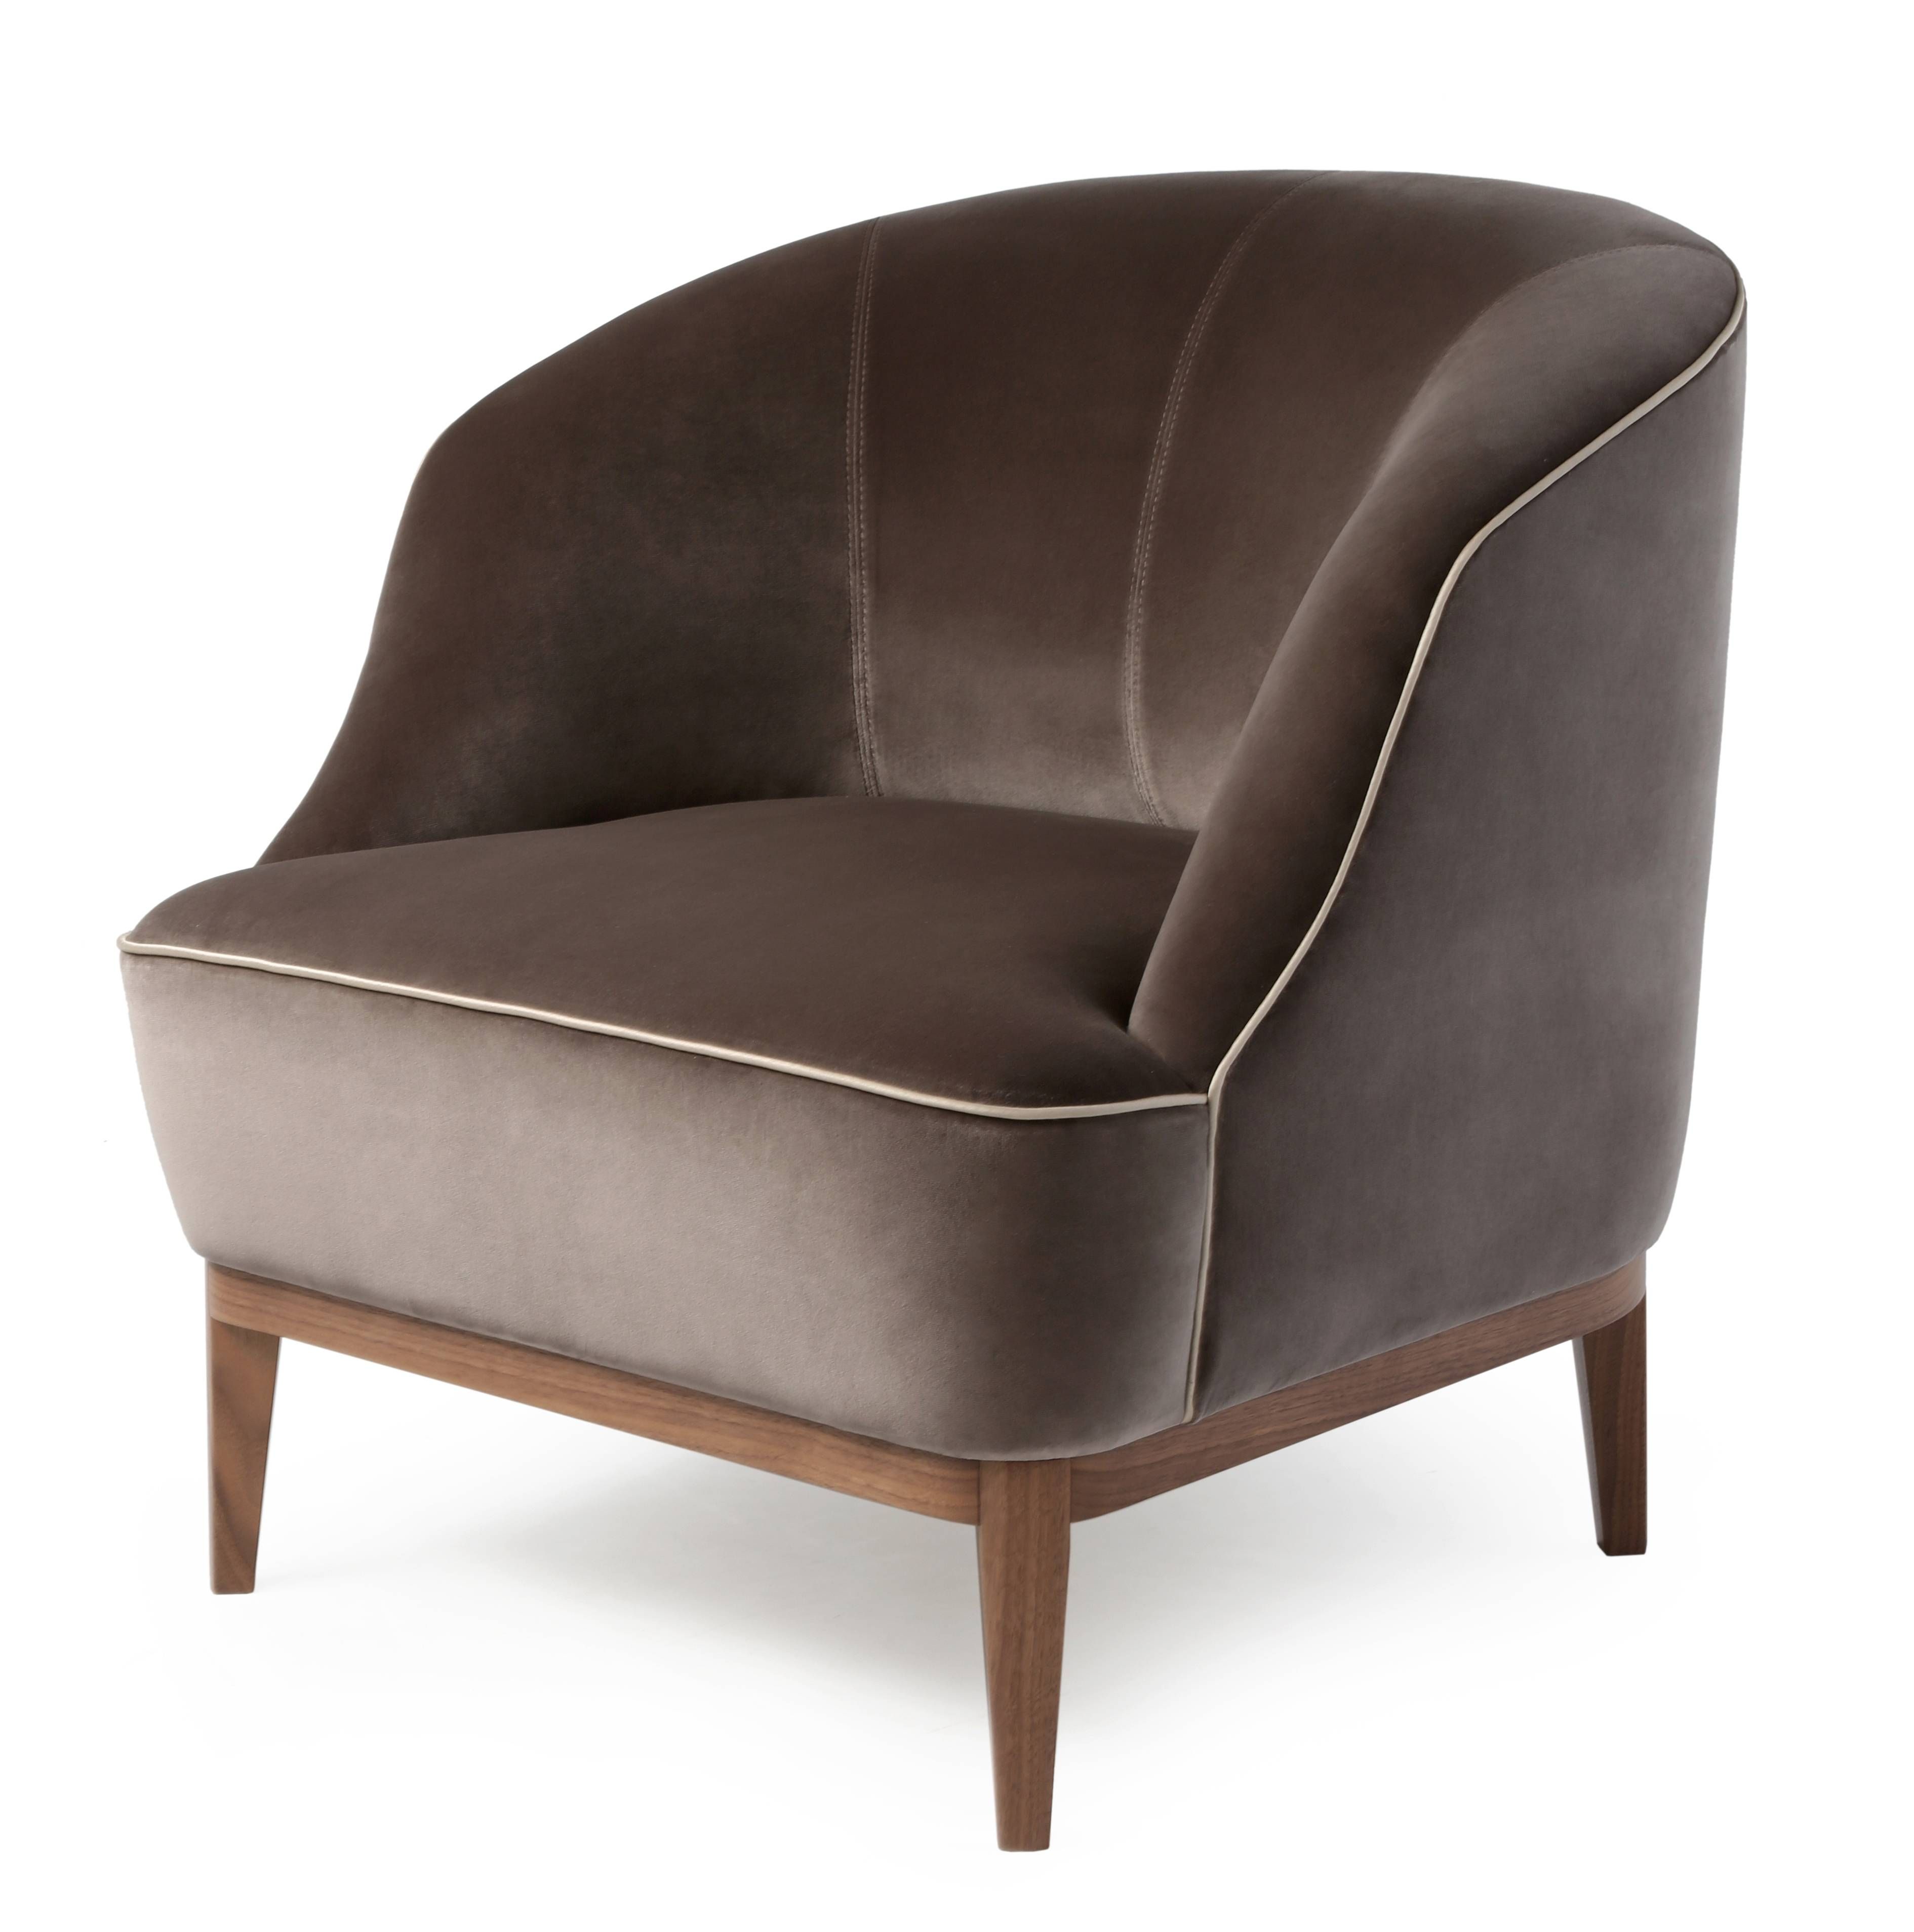 Relax On A Sofa Chair After A Long Day – Internationalinteriordesigns Intended For Sofa Chairs (View 11 of 30)